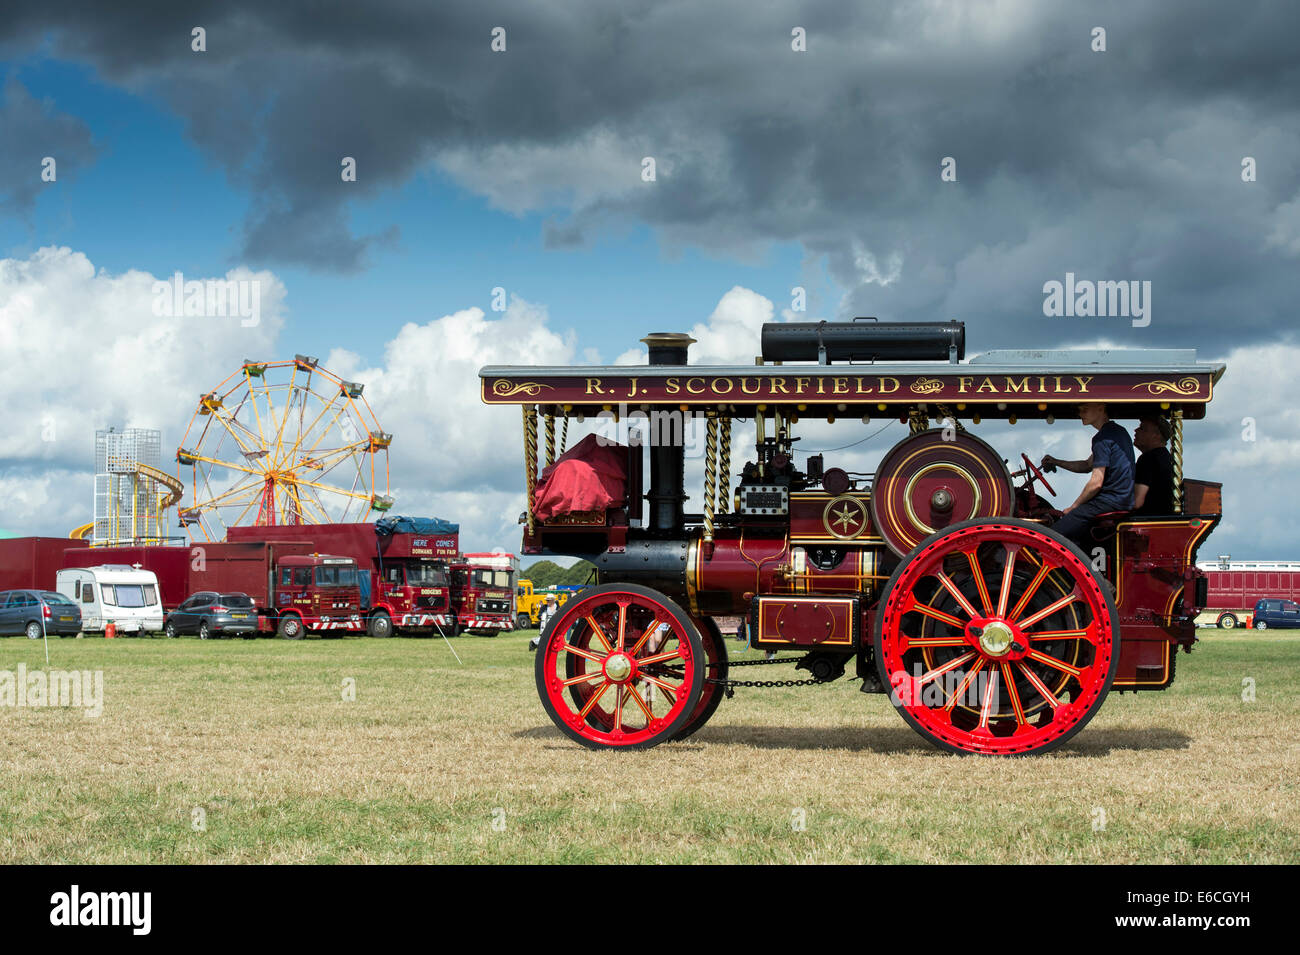 Showmans Traction Engine at a steam fair in England Stock Photo